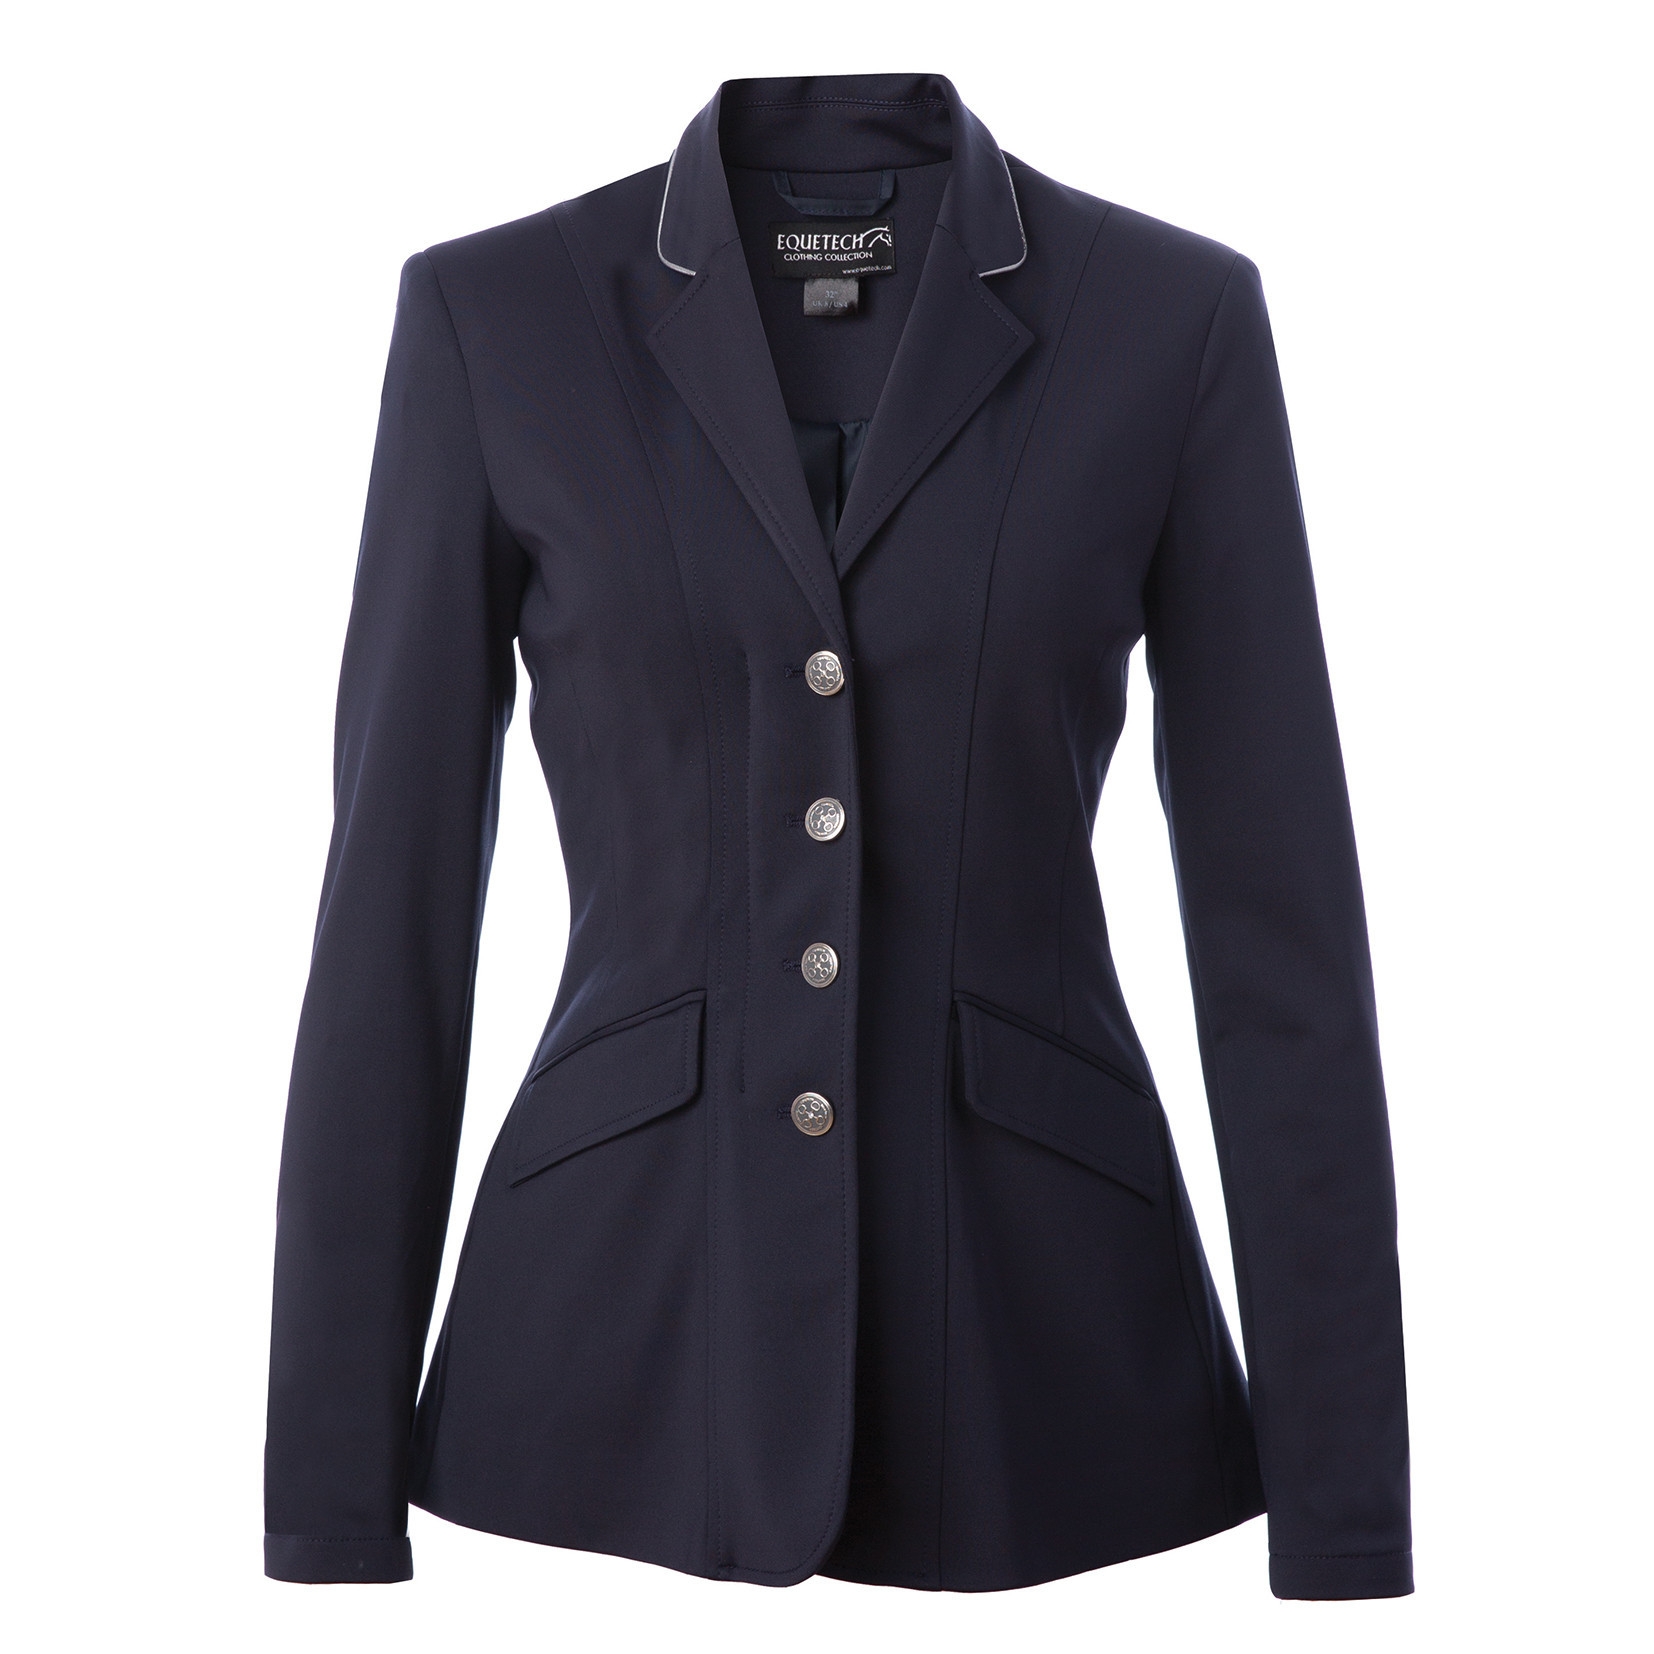 Jersey Deluxe Competition Jacket - www.equetech.com